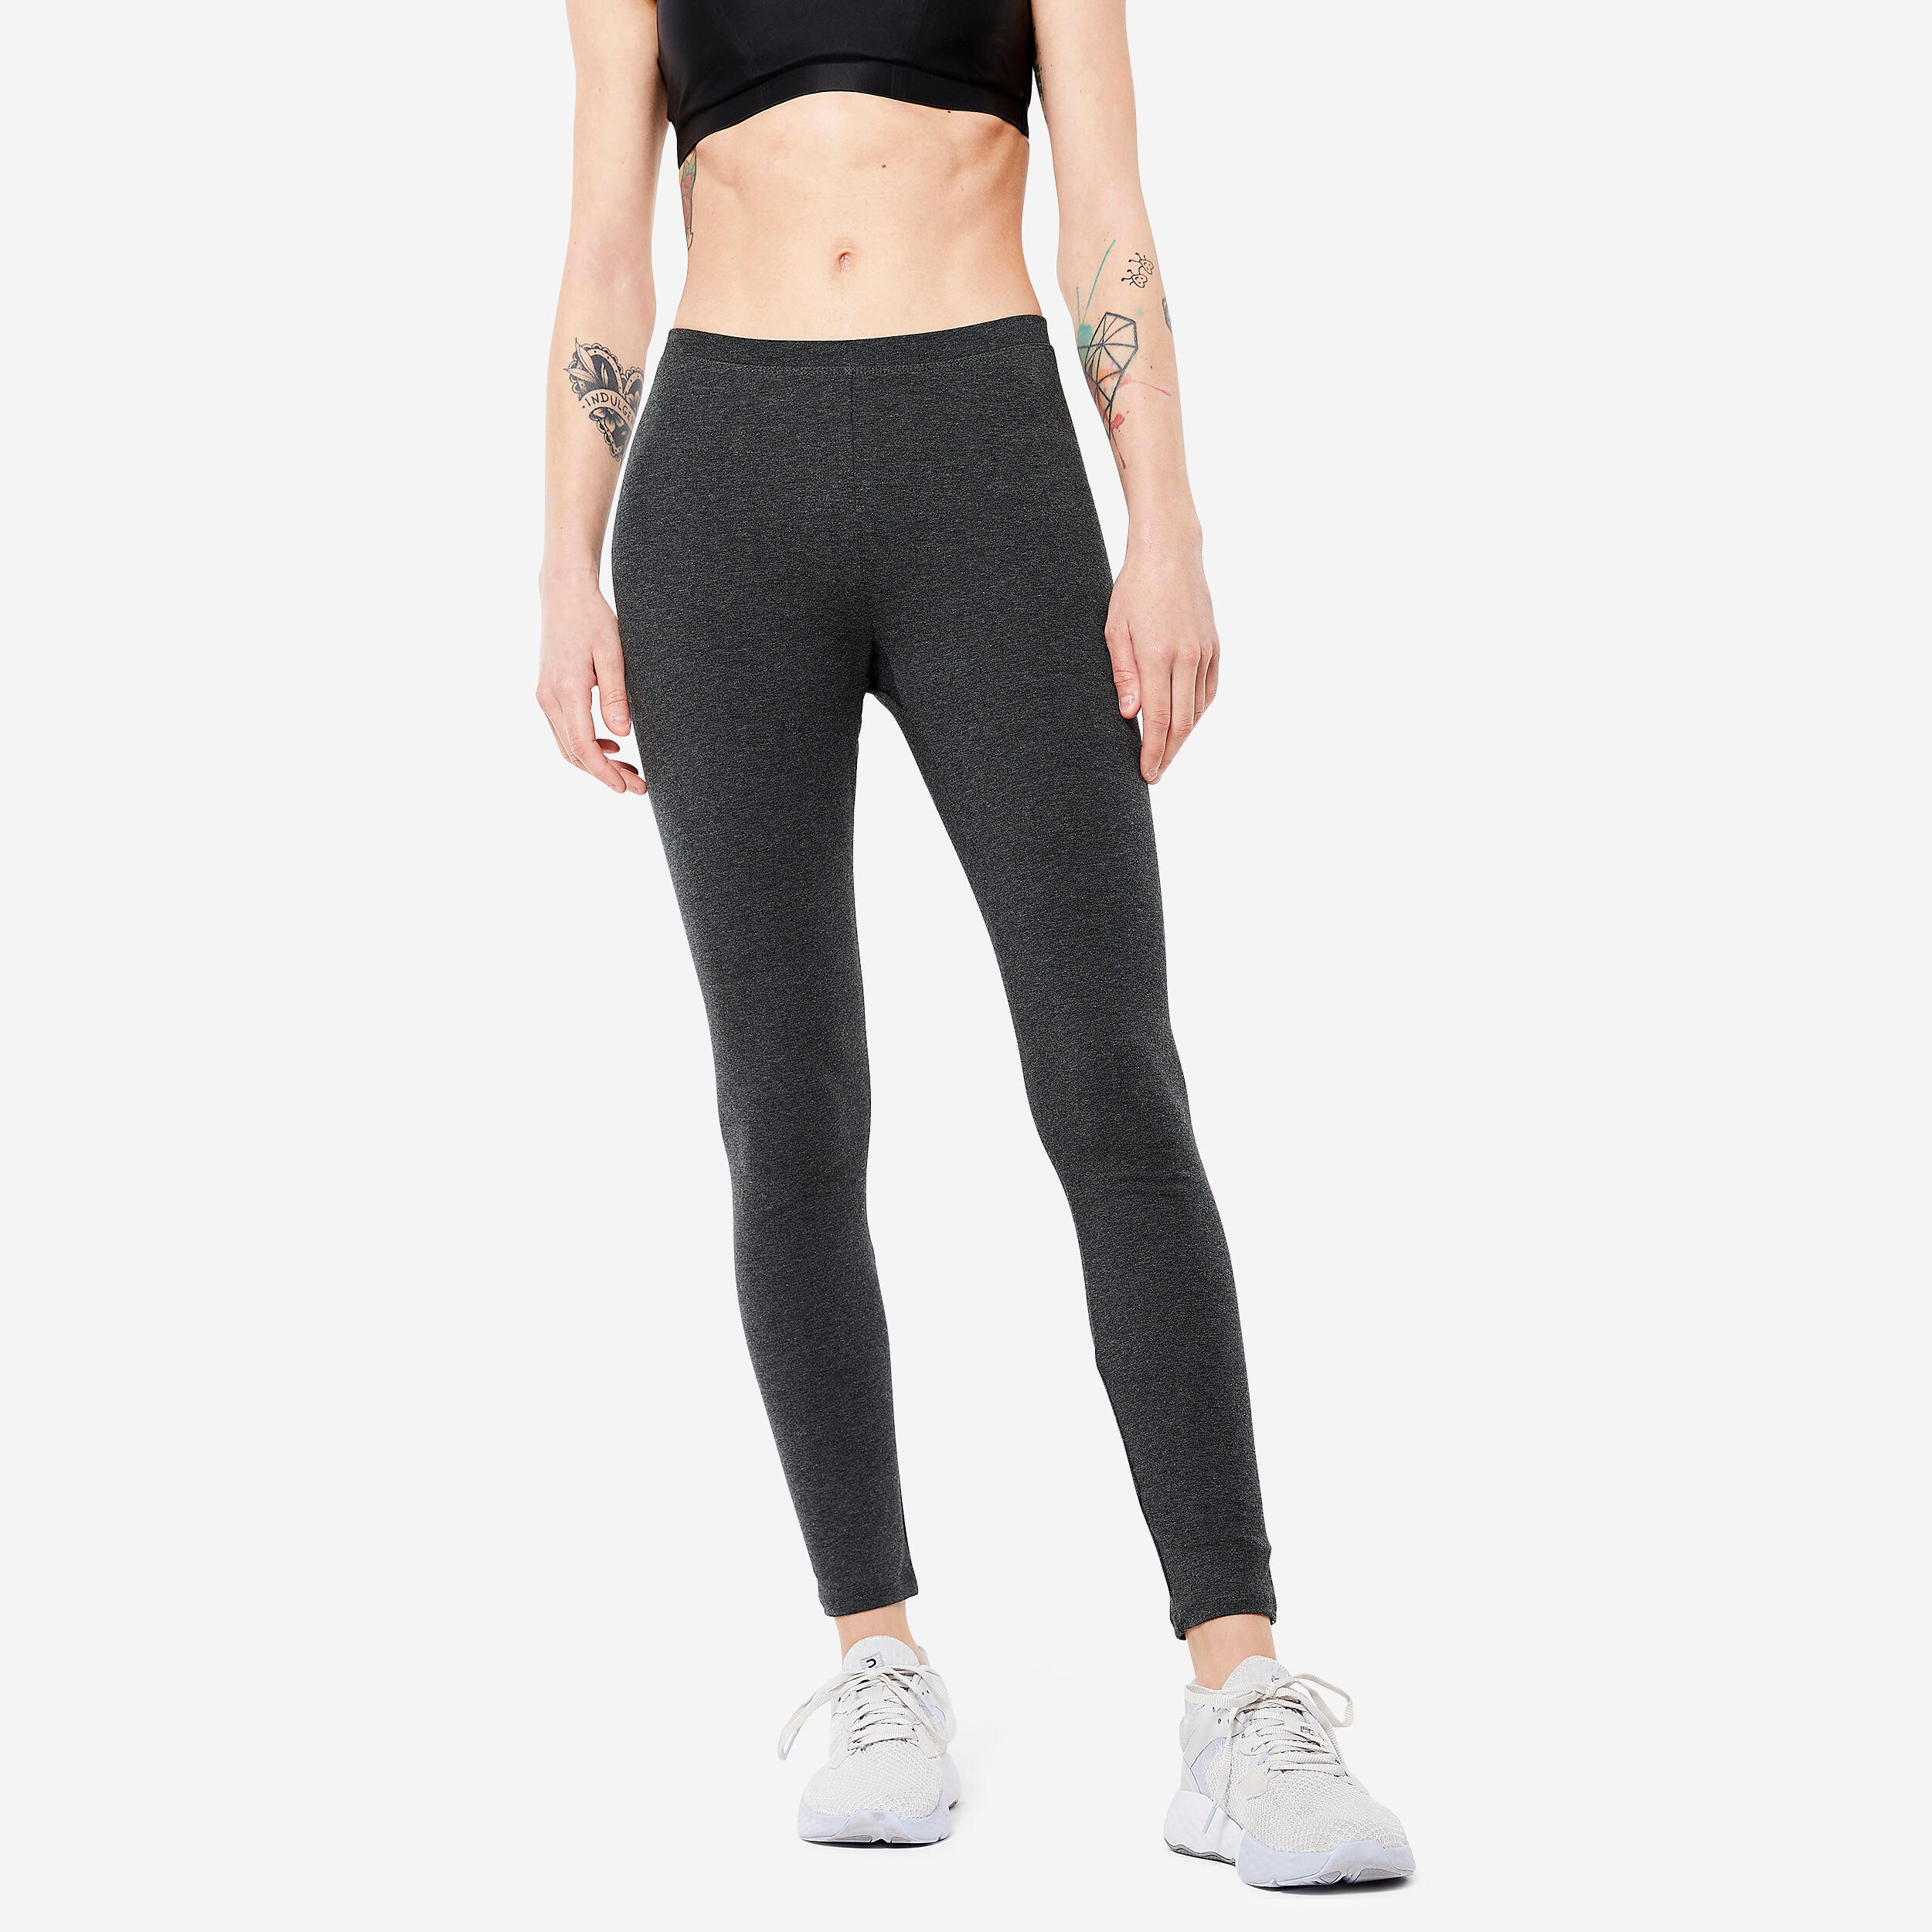 Stretchy High-Waisted Cotton Fitness Leggings with Mesh - Purple - Decathlon